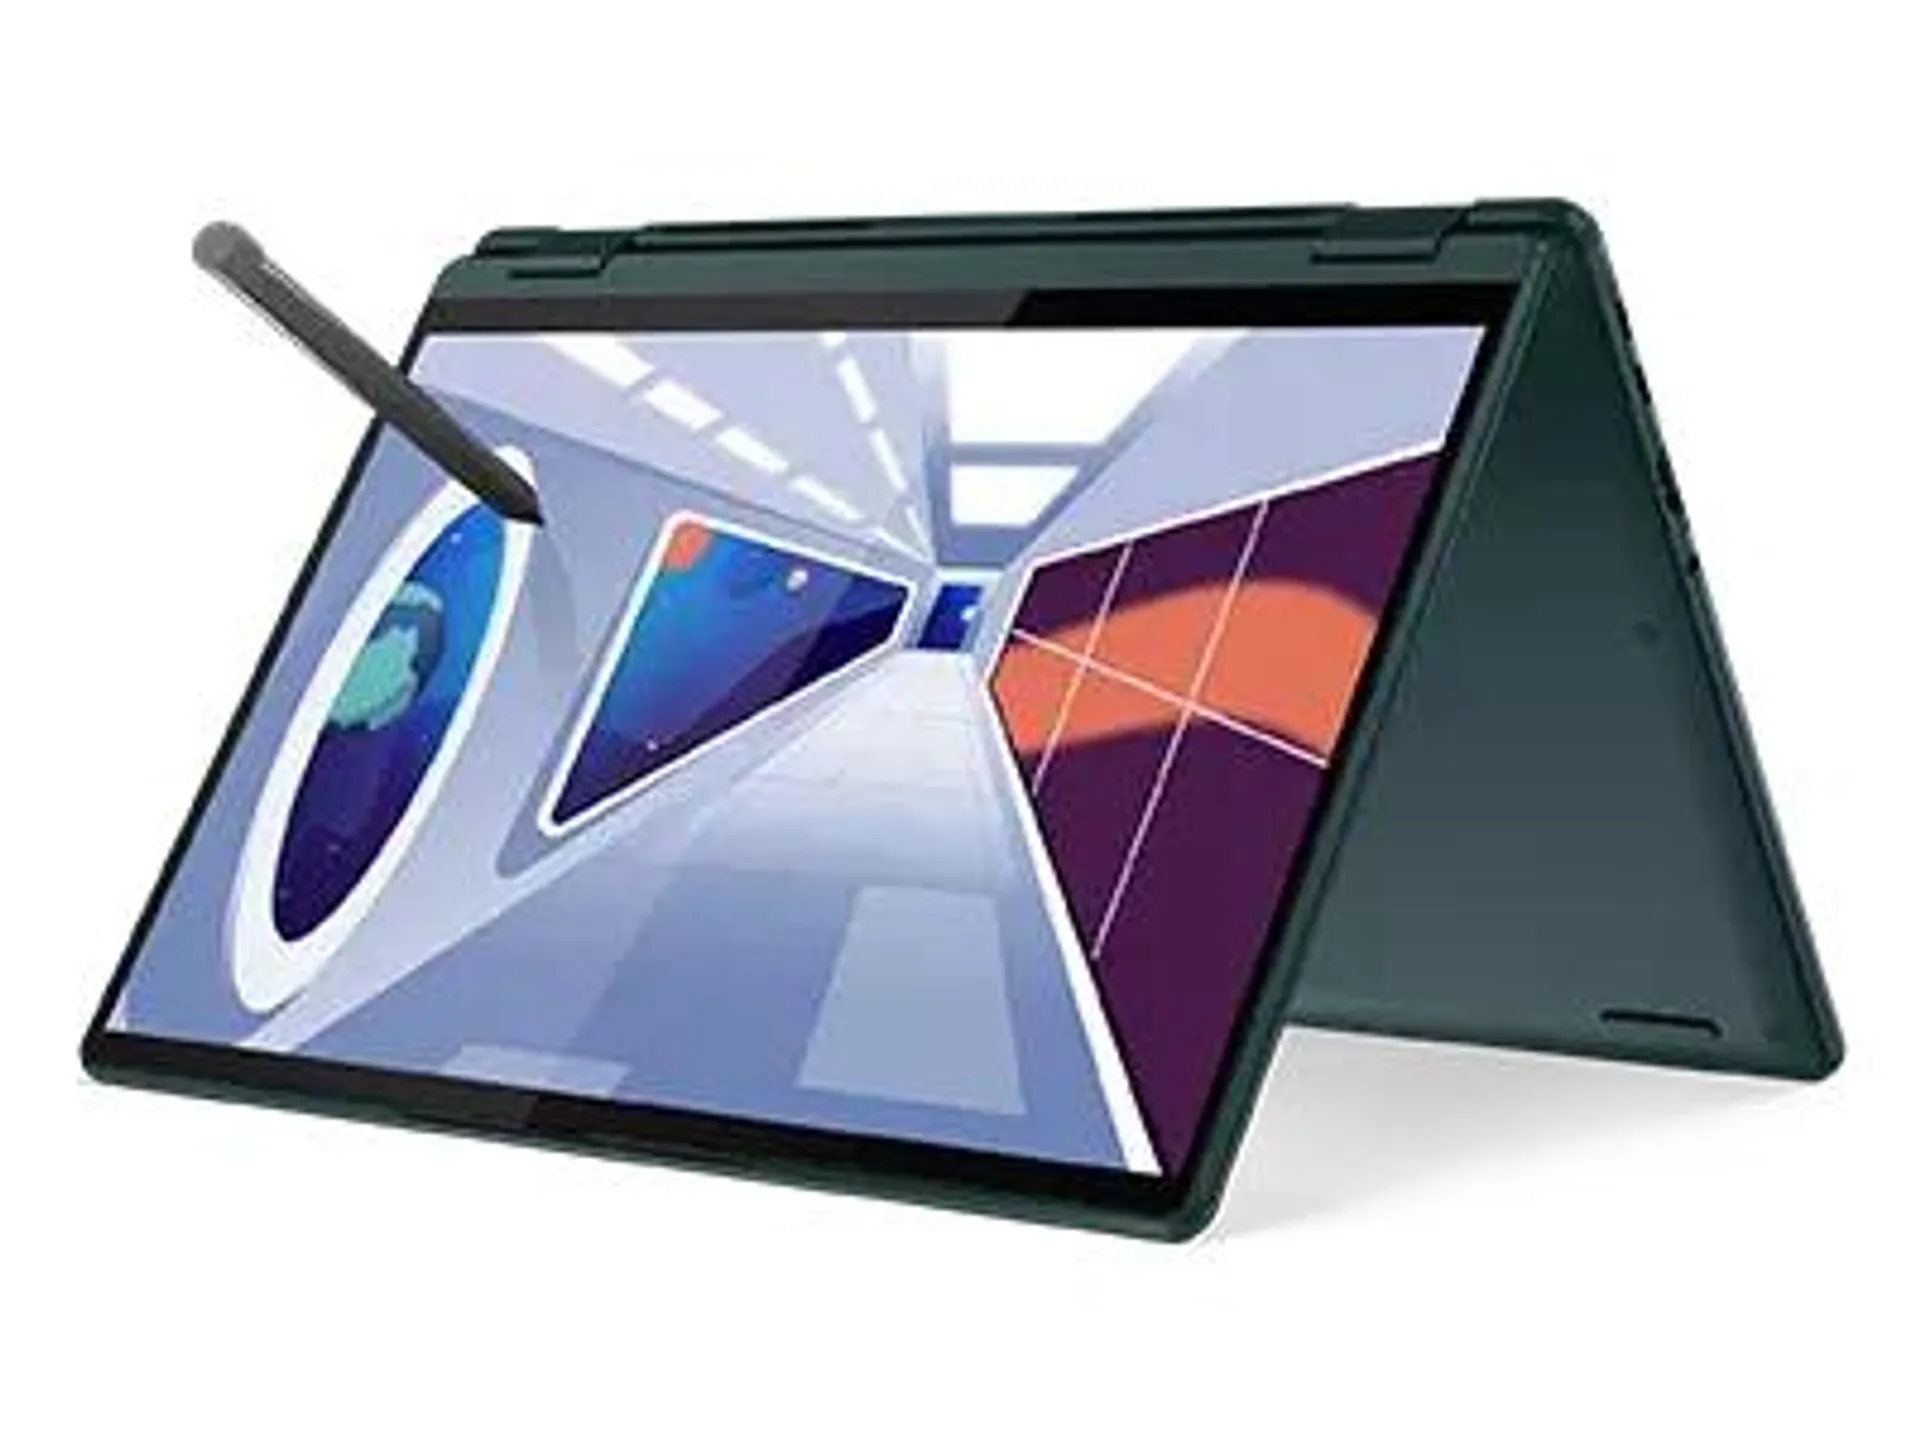 Yoga 6 (13” AMD) - Dark Teal with Aluminum Top Cover